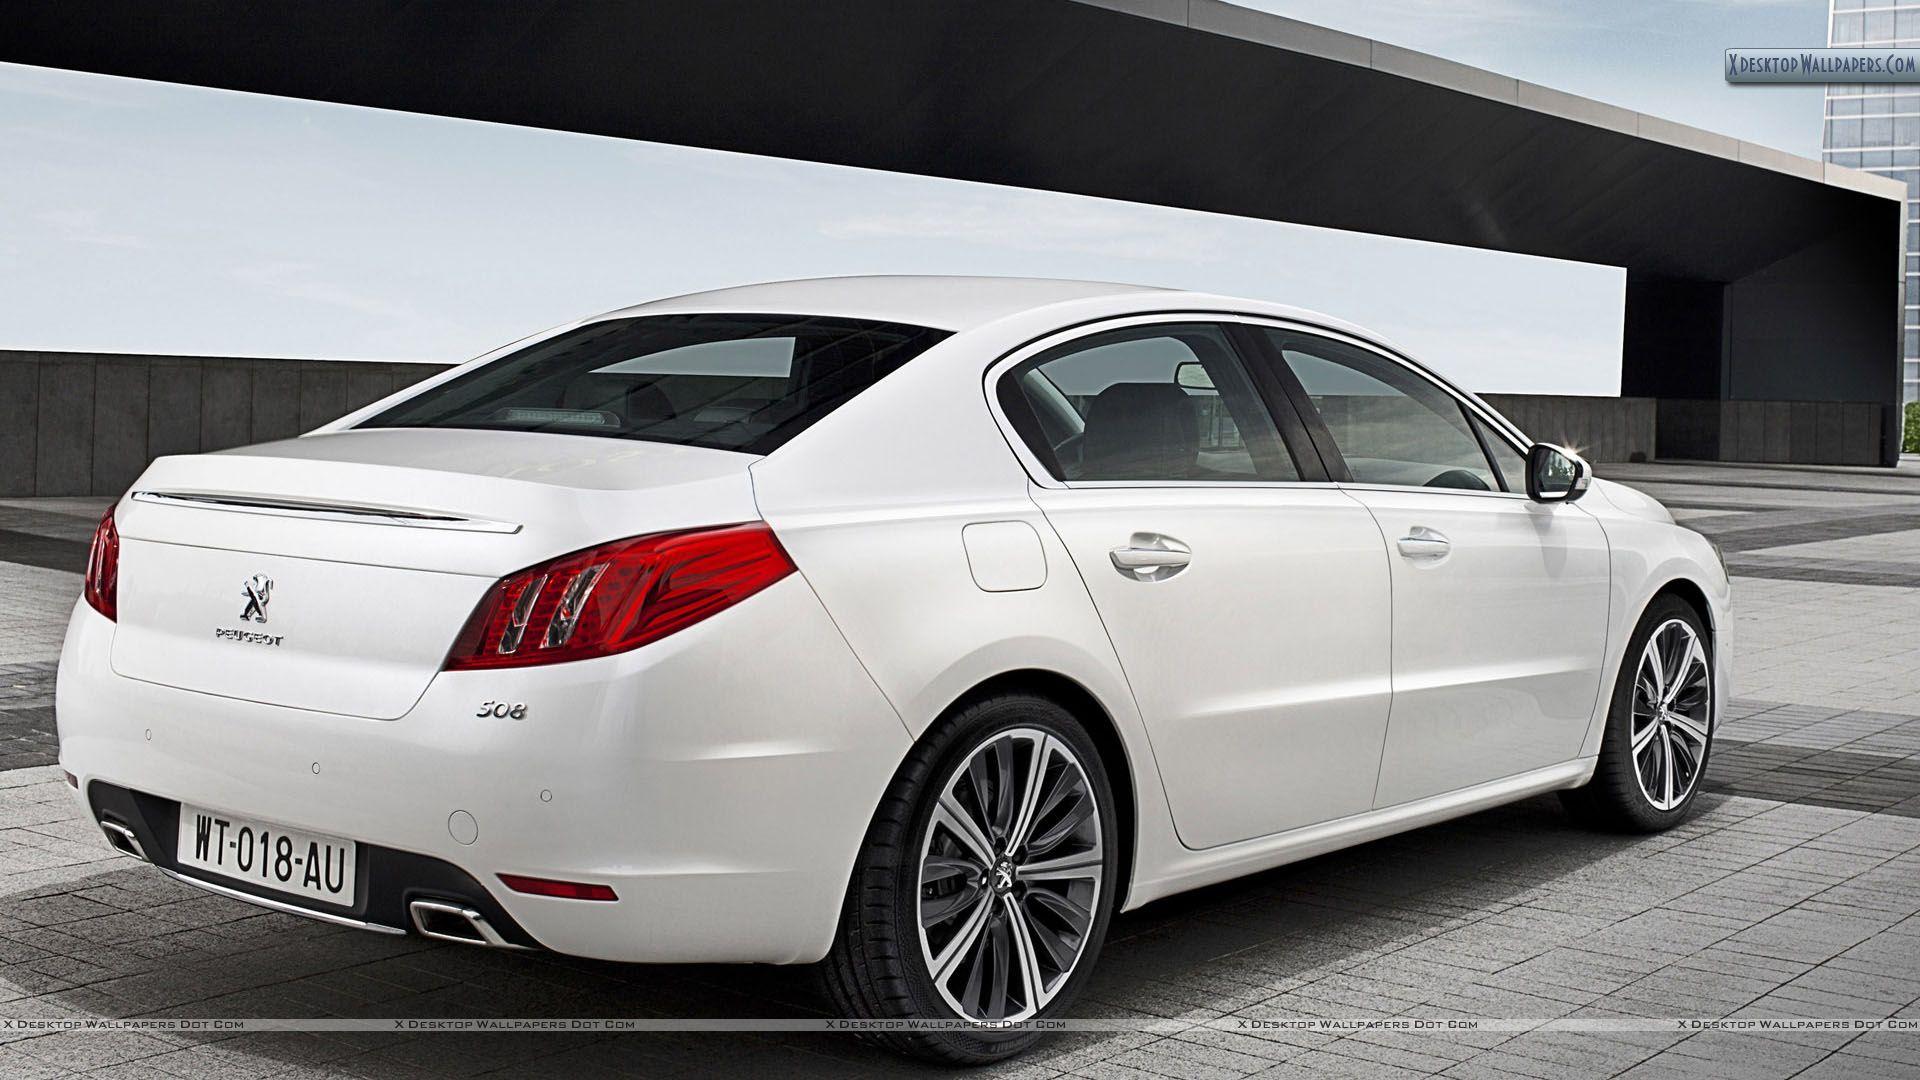 Peugeot Saloon Back Pose in White Color Wallpapers